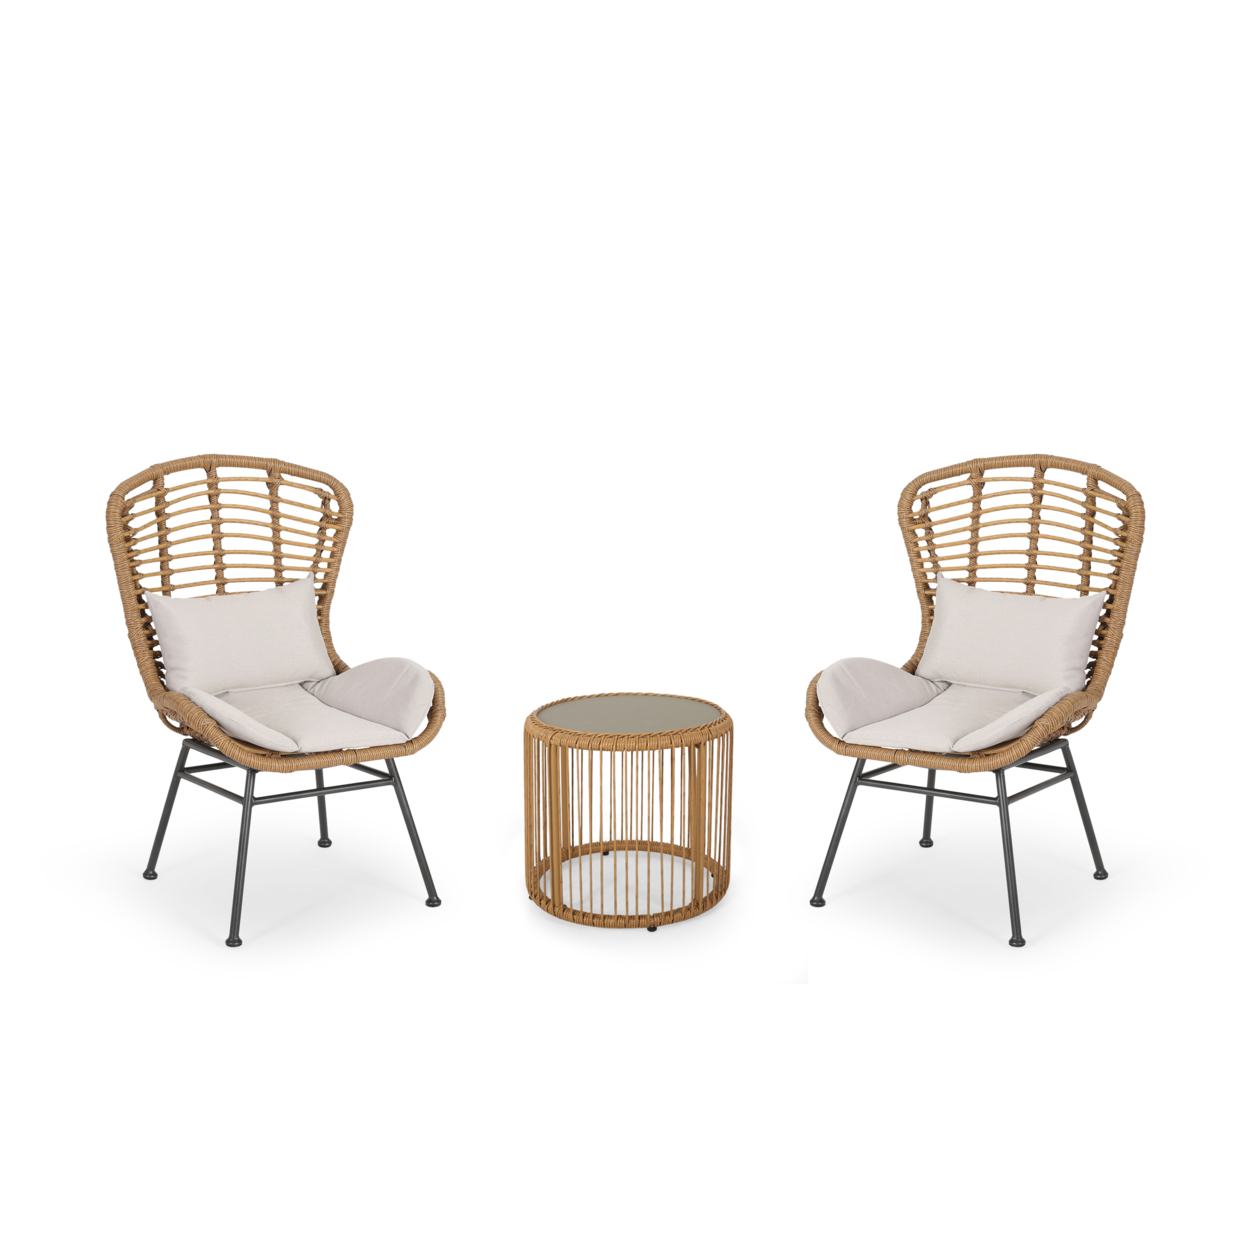 Daisy Outdoor Modern Boho 2 Seater Wicker Chat Set With Side Table - Light Brown + Black + Beige